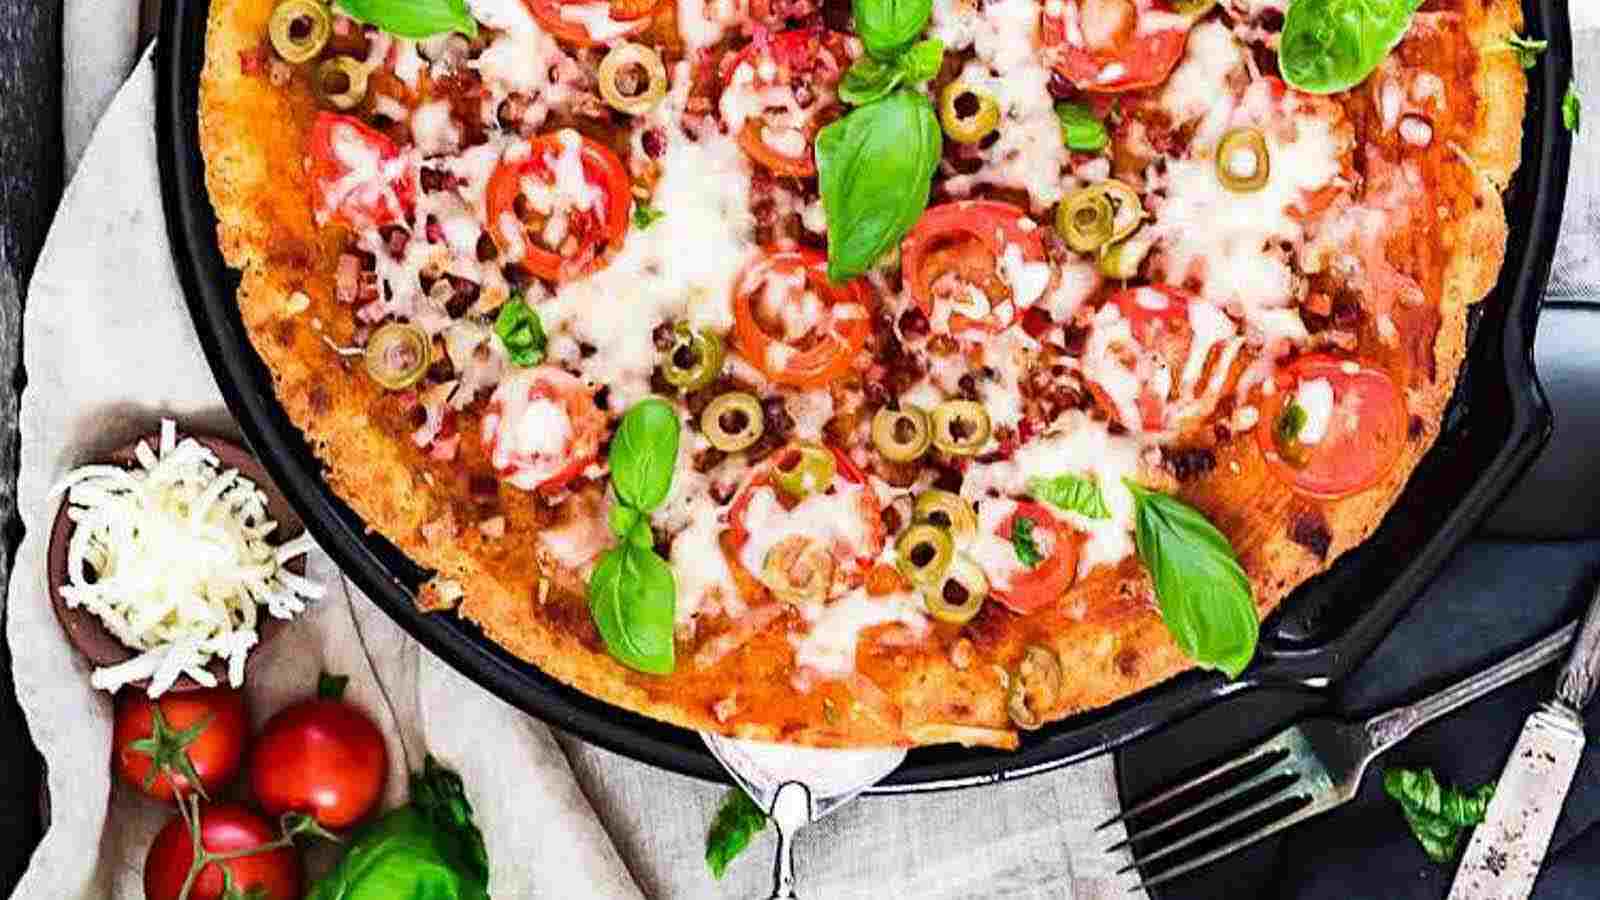 Bacon-Infused Fathead Pizza. Photo credit: Low Carb – No Carb.